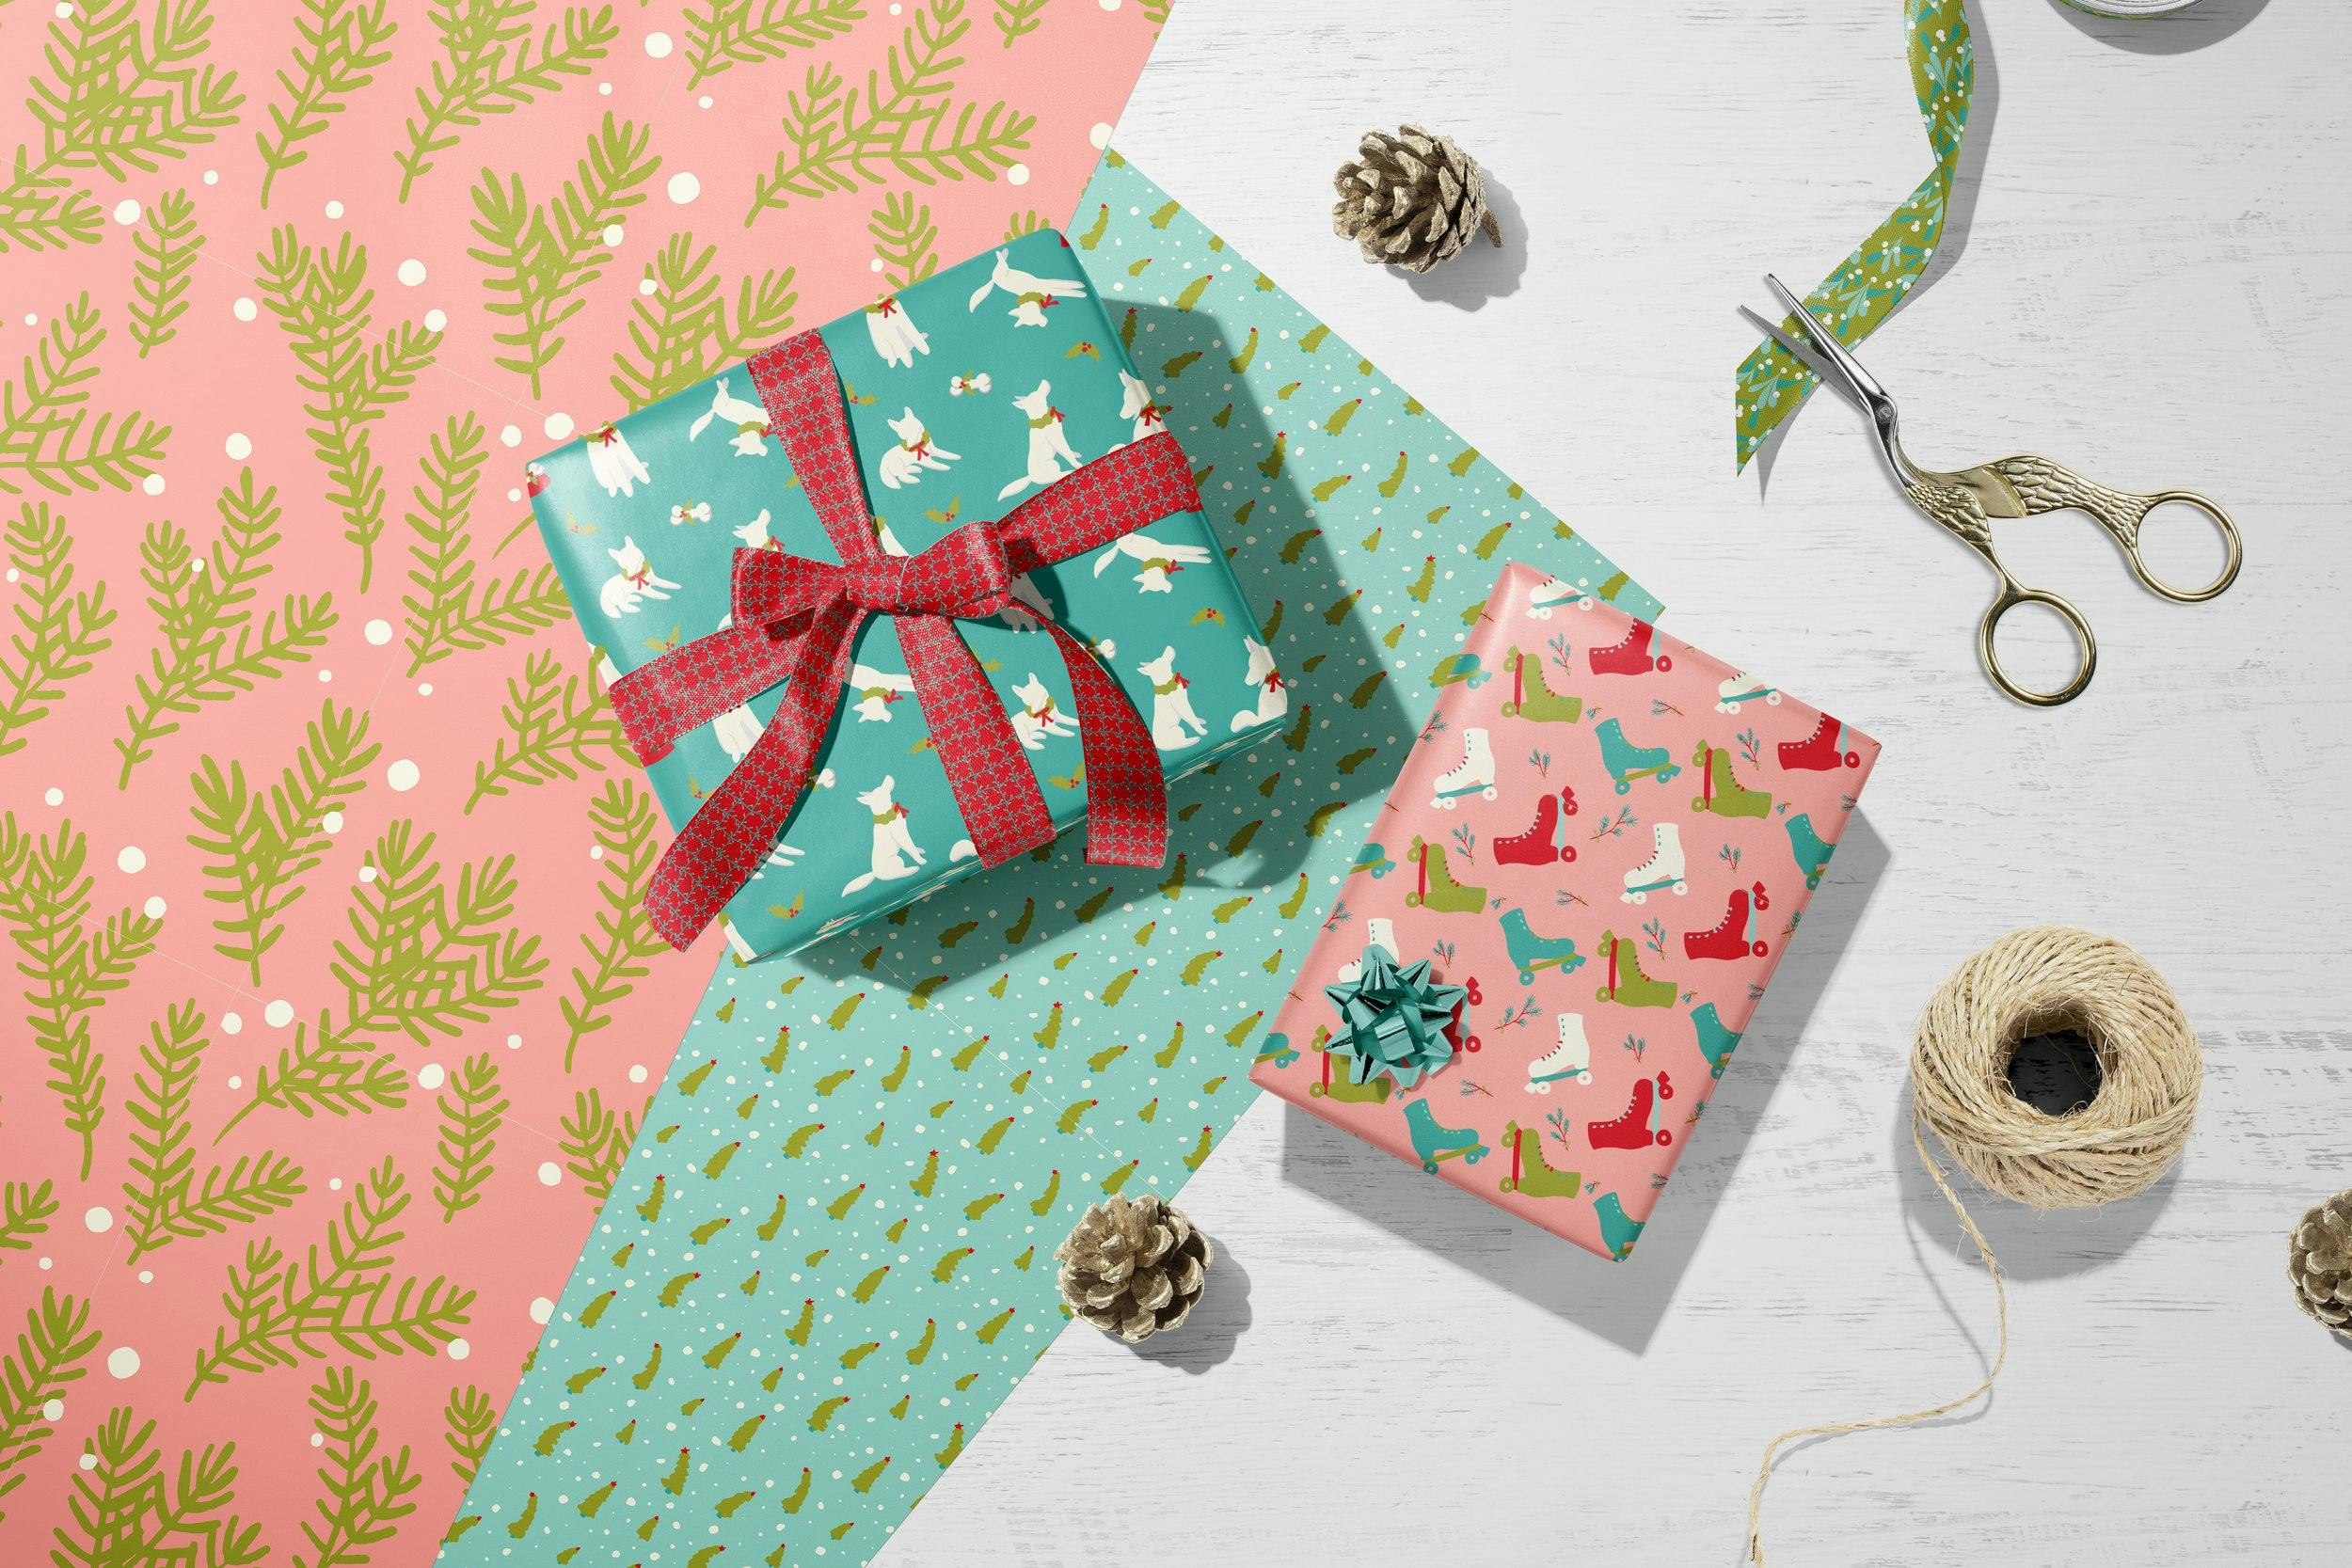 Paper patterns applied to gift boxes